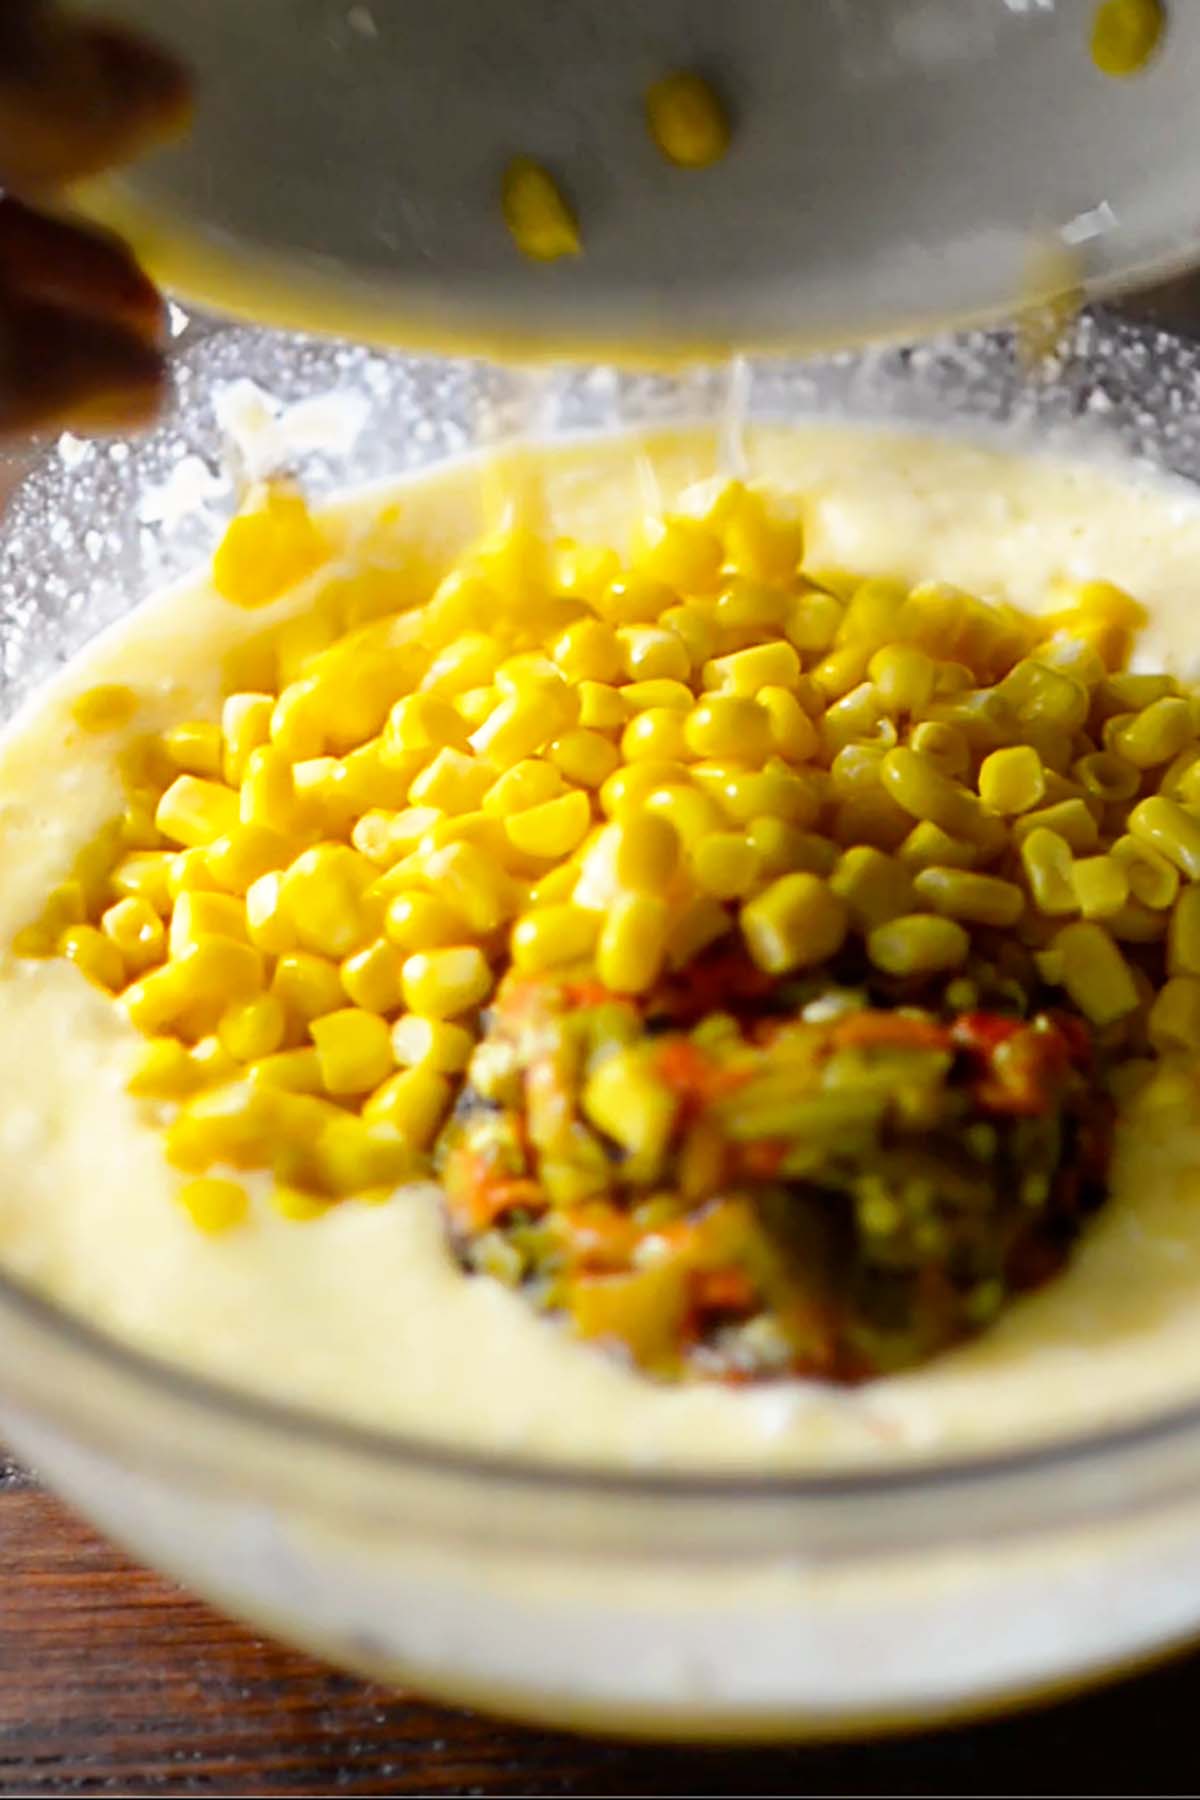 Cream corn and hatch chiles being added to a bowl.